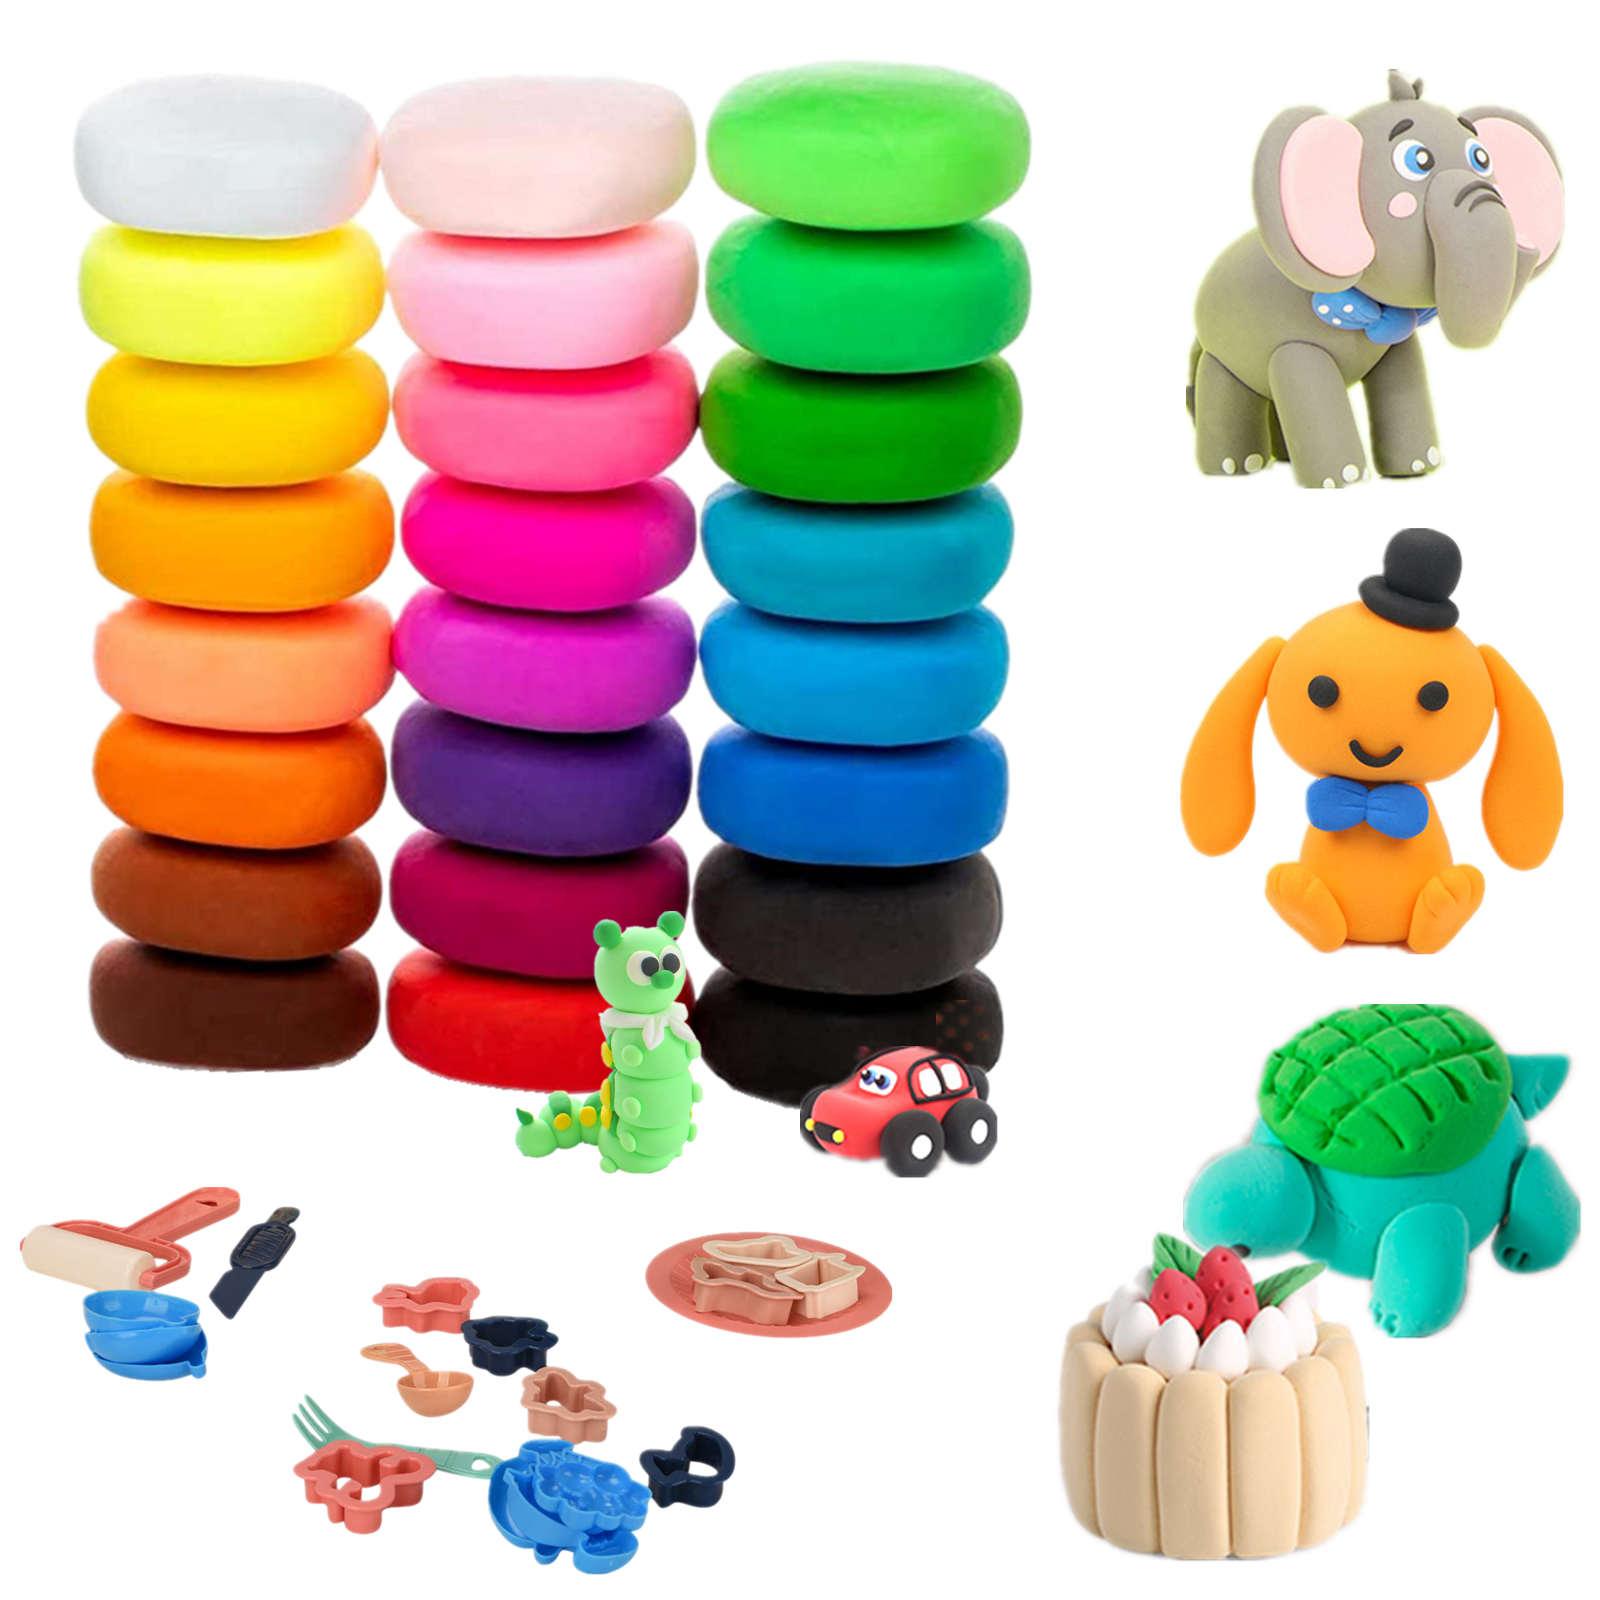 Model Magic Clay with Tools Instructions Molding Clay STEM Toys Best Gift for Boys Girls Funny Poop Air Dry Clay 24 Colors Modeling Clay for Kids 